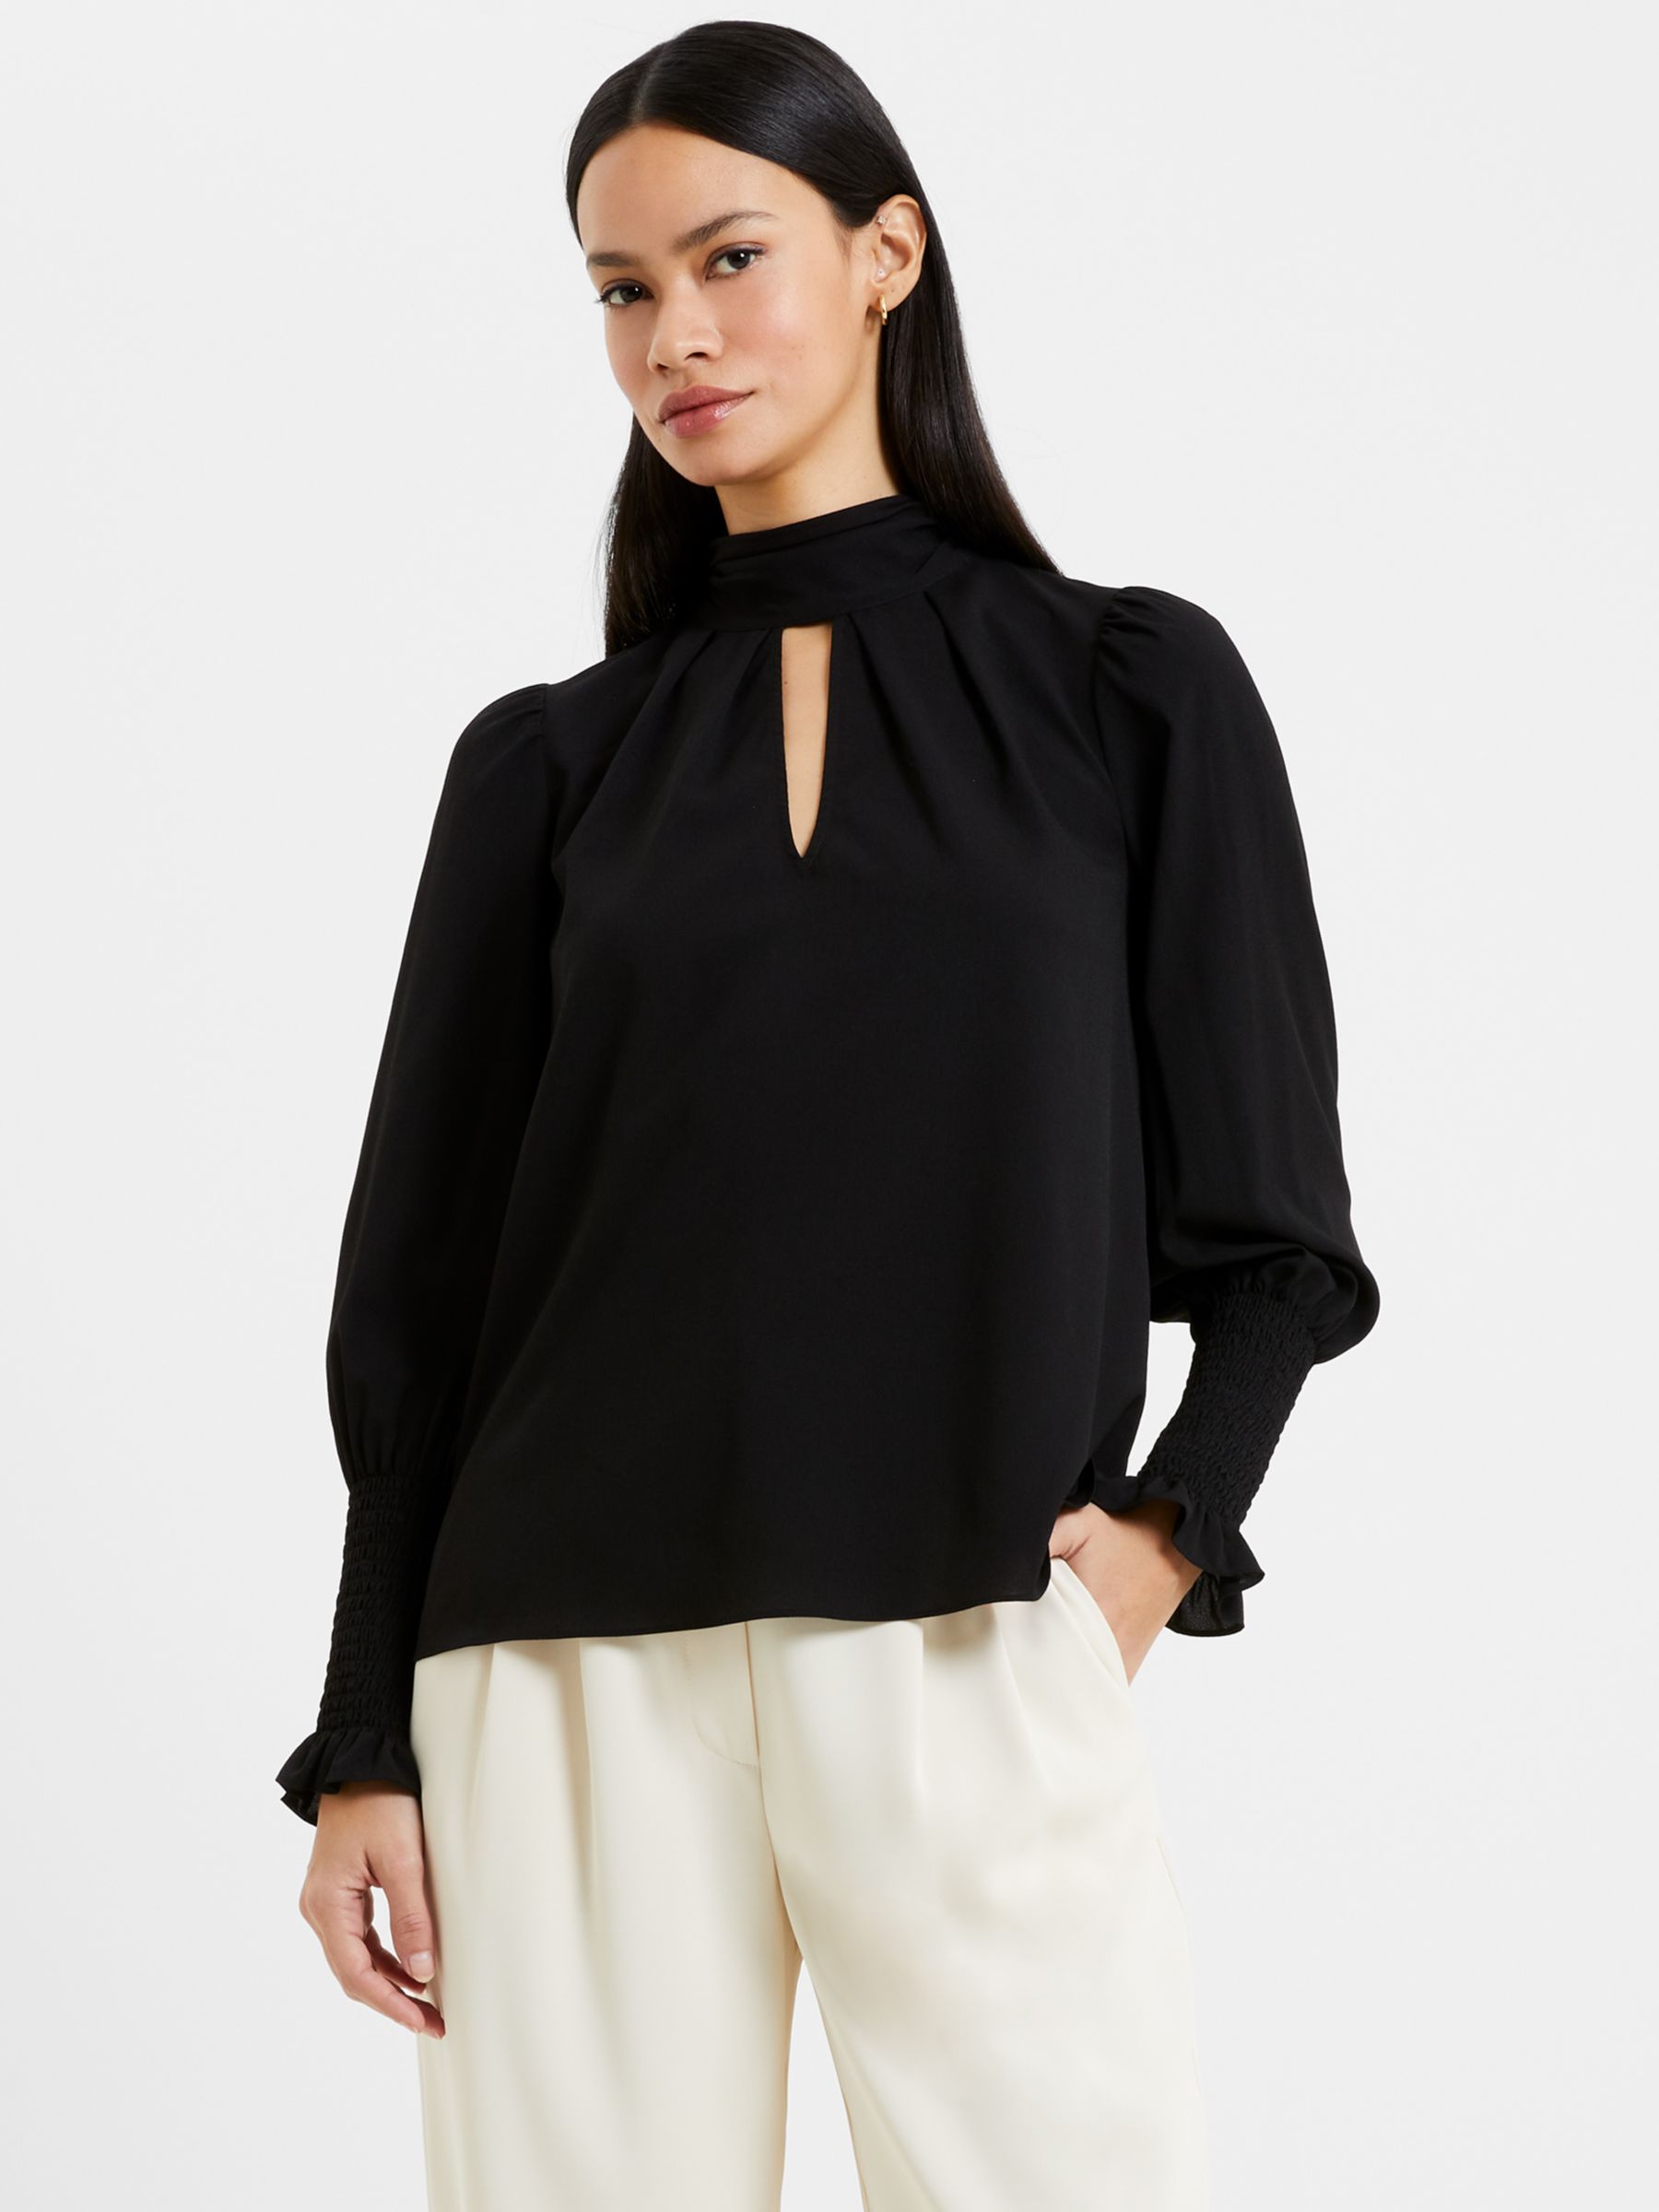 Buy French Connection Crepe High Neck Top Online at johnlewis.com